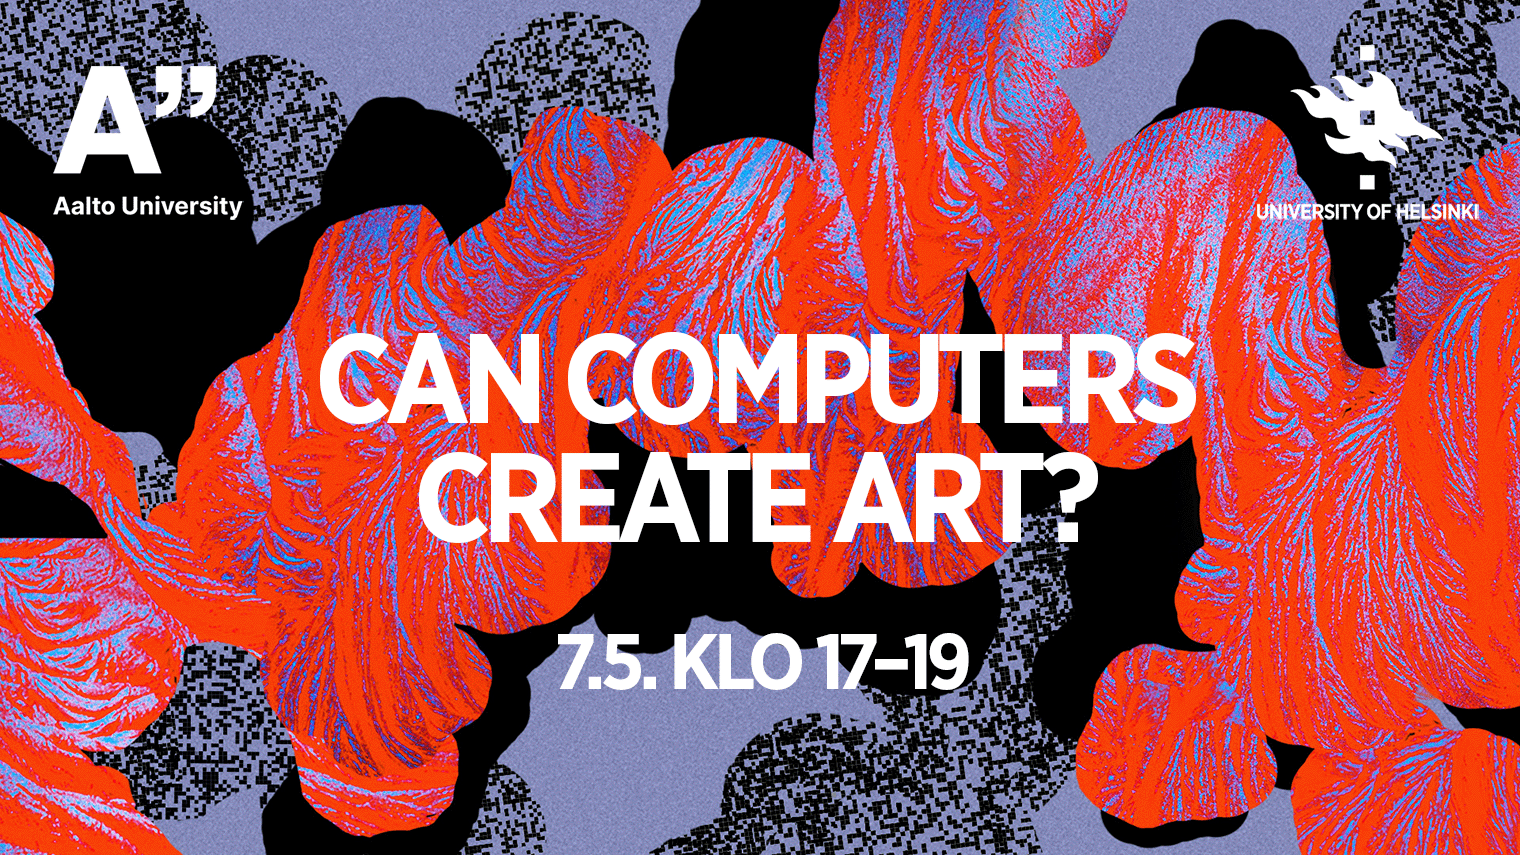 Can computers create art?